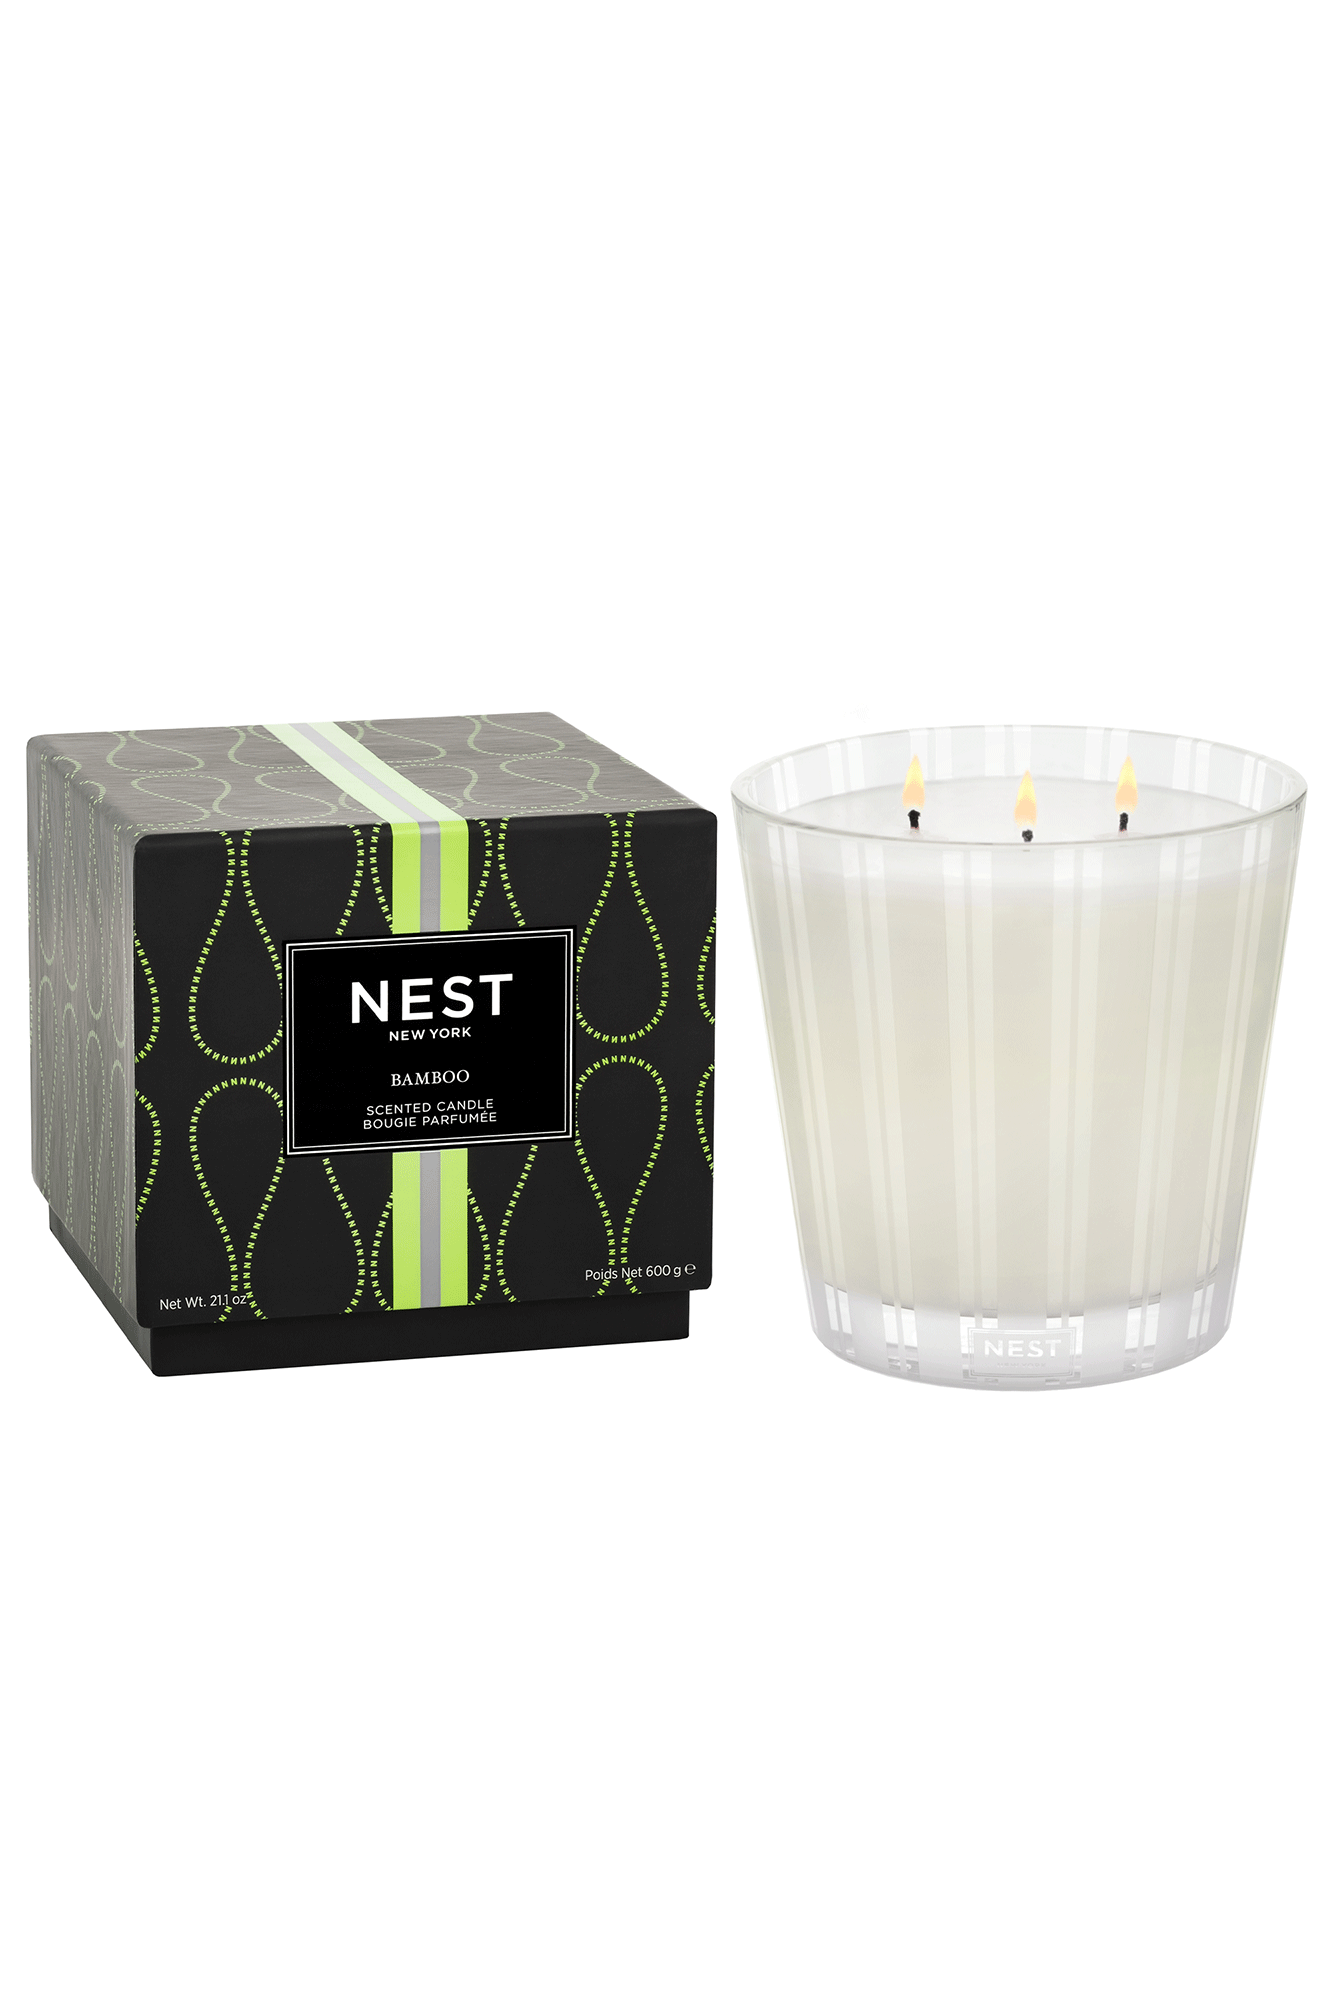 Experience nature's beauty with the NEST New York Bamboo 3-Wick Candle. Filled with a blend of white florals, lush green notes, and sparkling citrus, this iconic candle has a 4.7 star rating and a burn time of 75-100 hours, depending on the size chosen. Create a soothing aroma of a welcoming garden in any space.